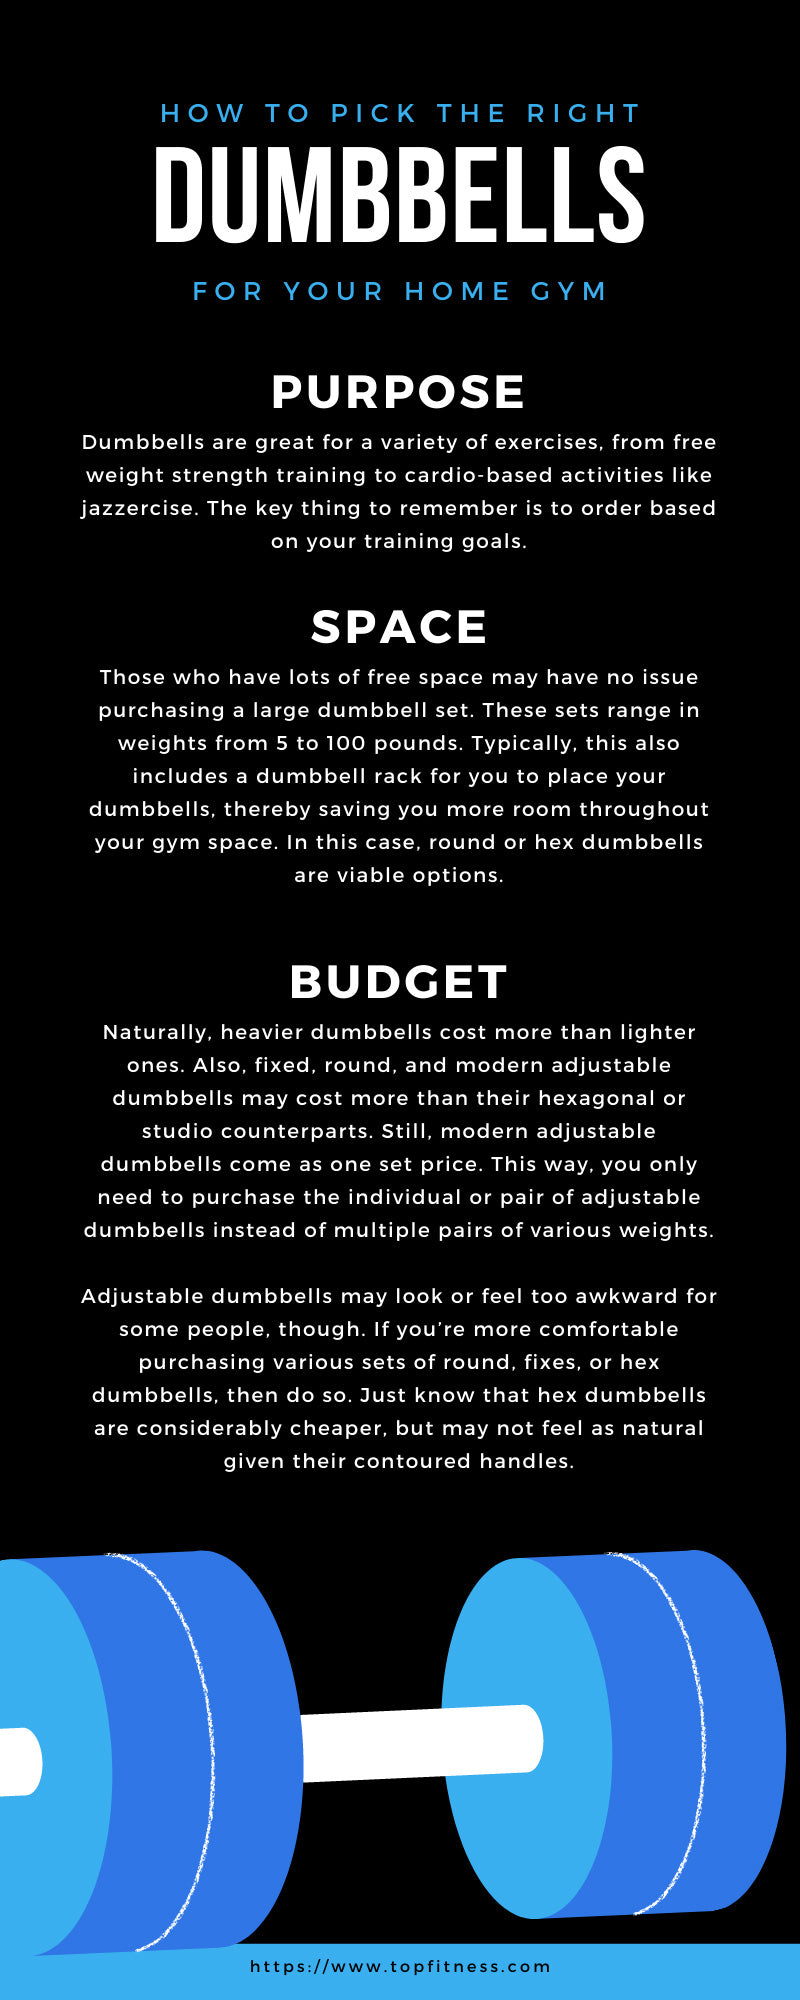 How To Pick the Right Dumbbells for Your Home Gym